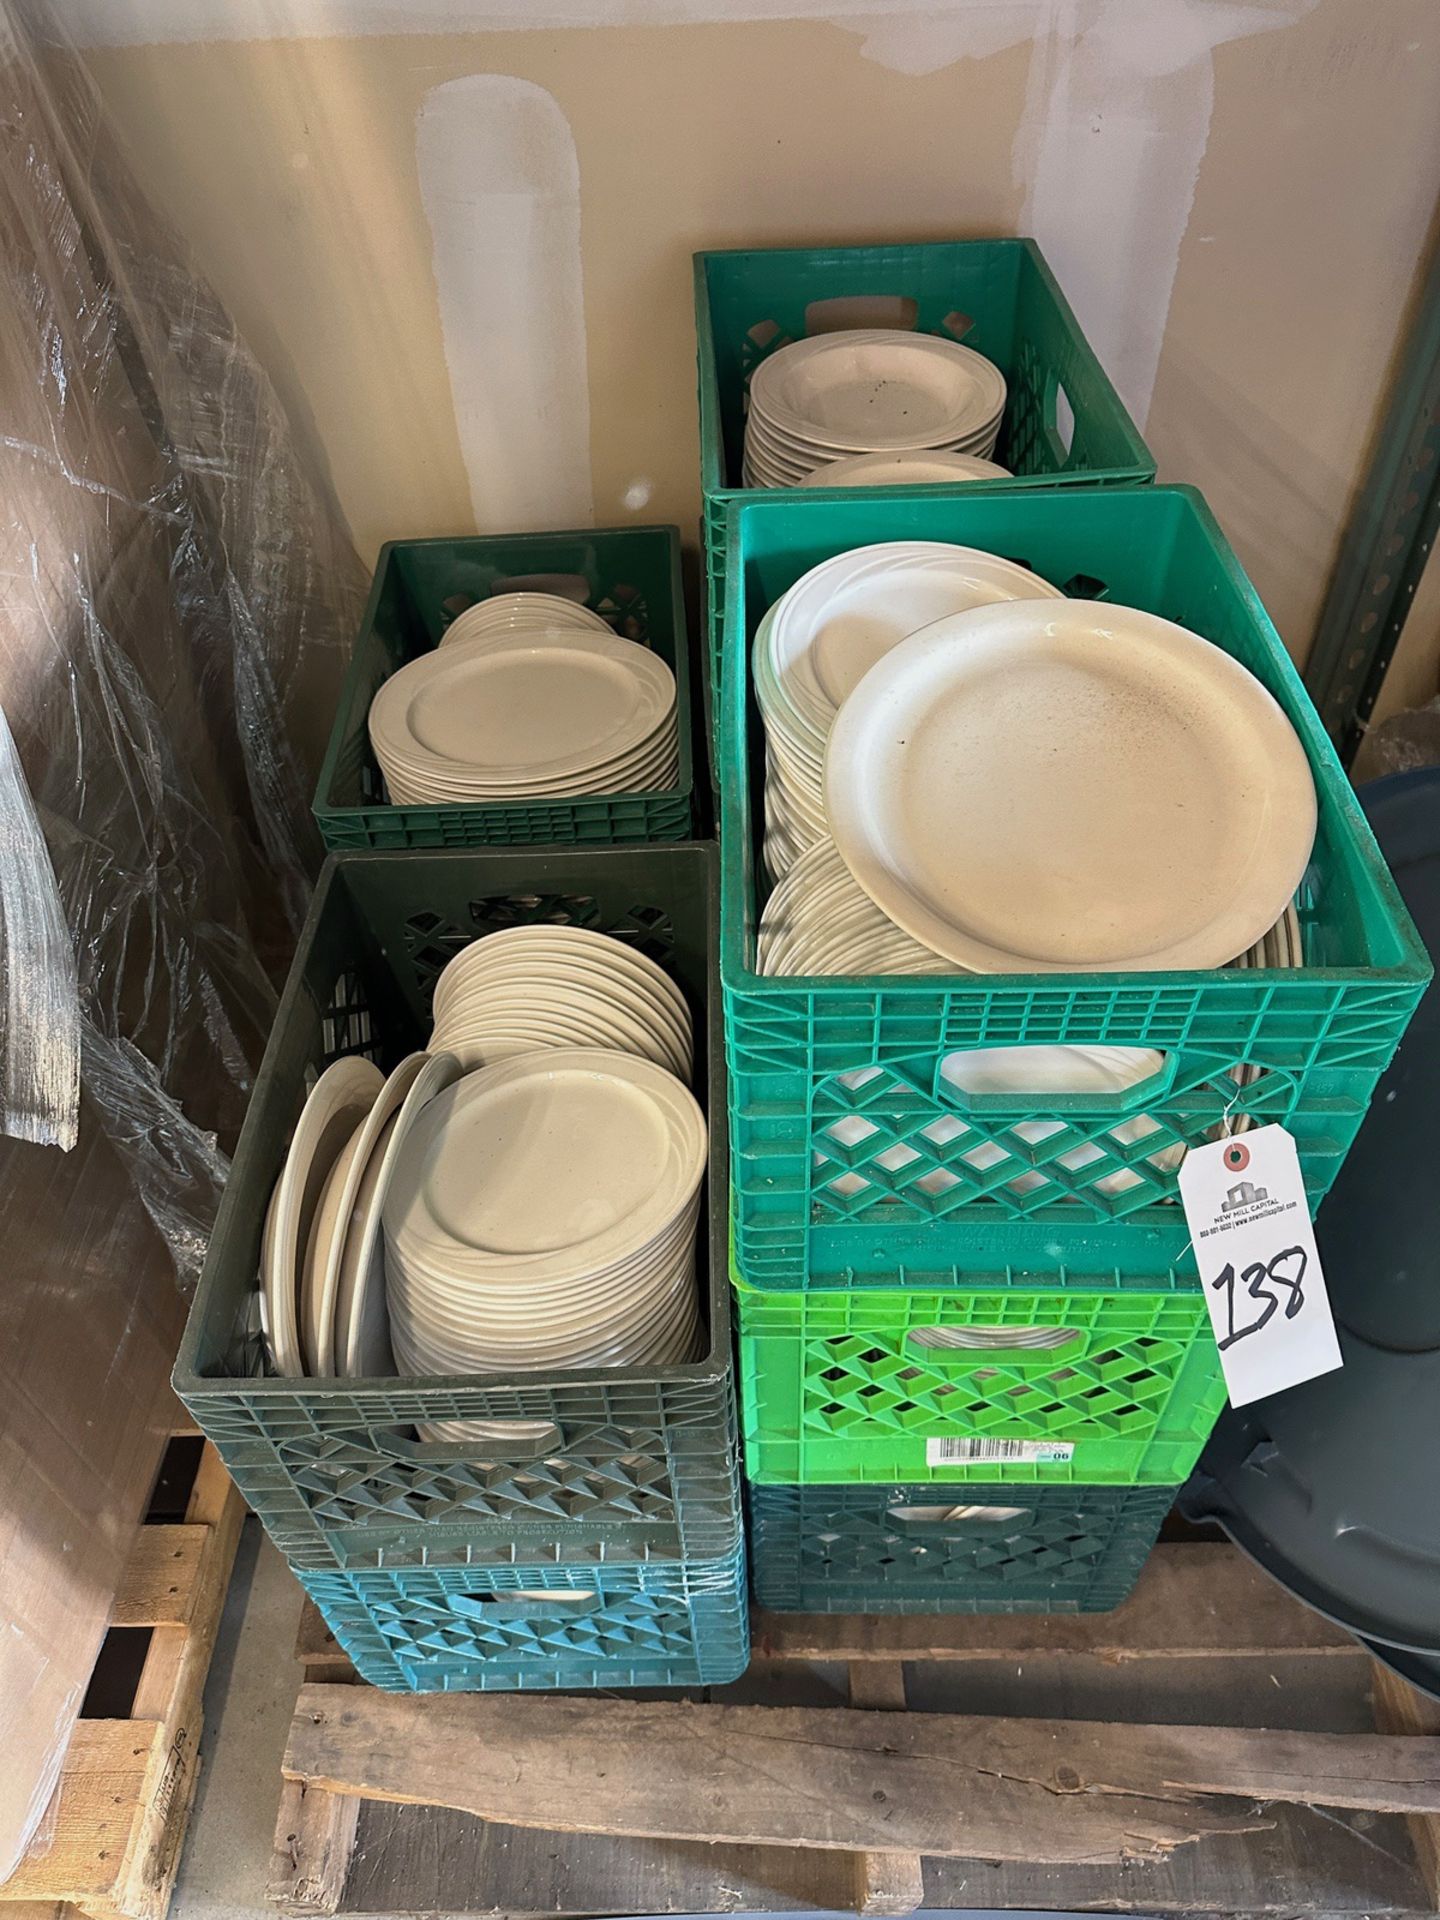 Lot of Plates and Misc. Dishes - Subj to Bulk | Rig Fee $35